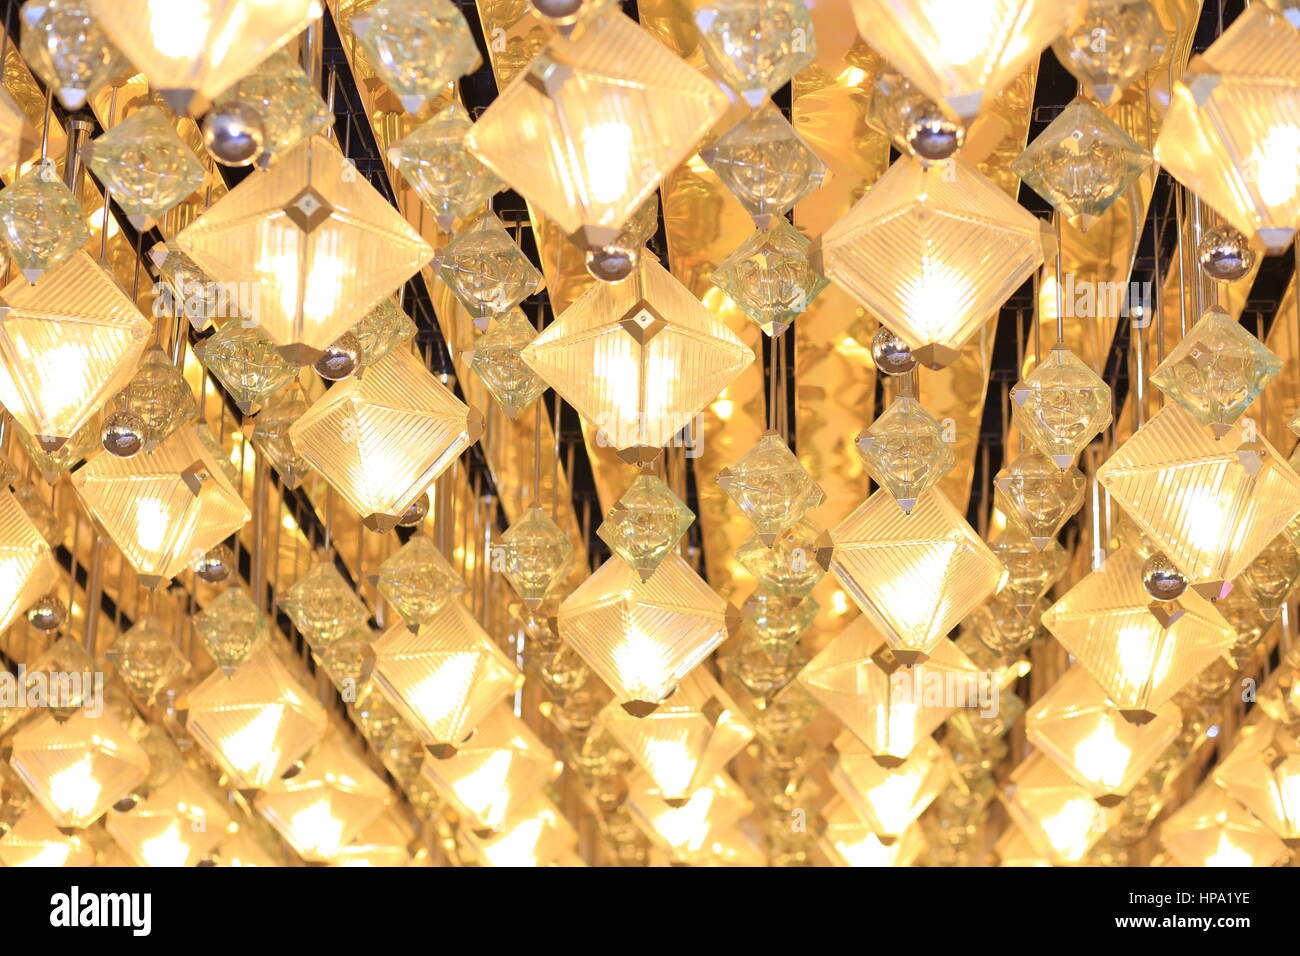 Shiny yellow  lanterns. Bright background with electric lights. Stock Photo